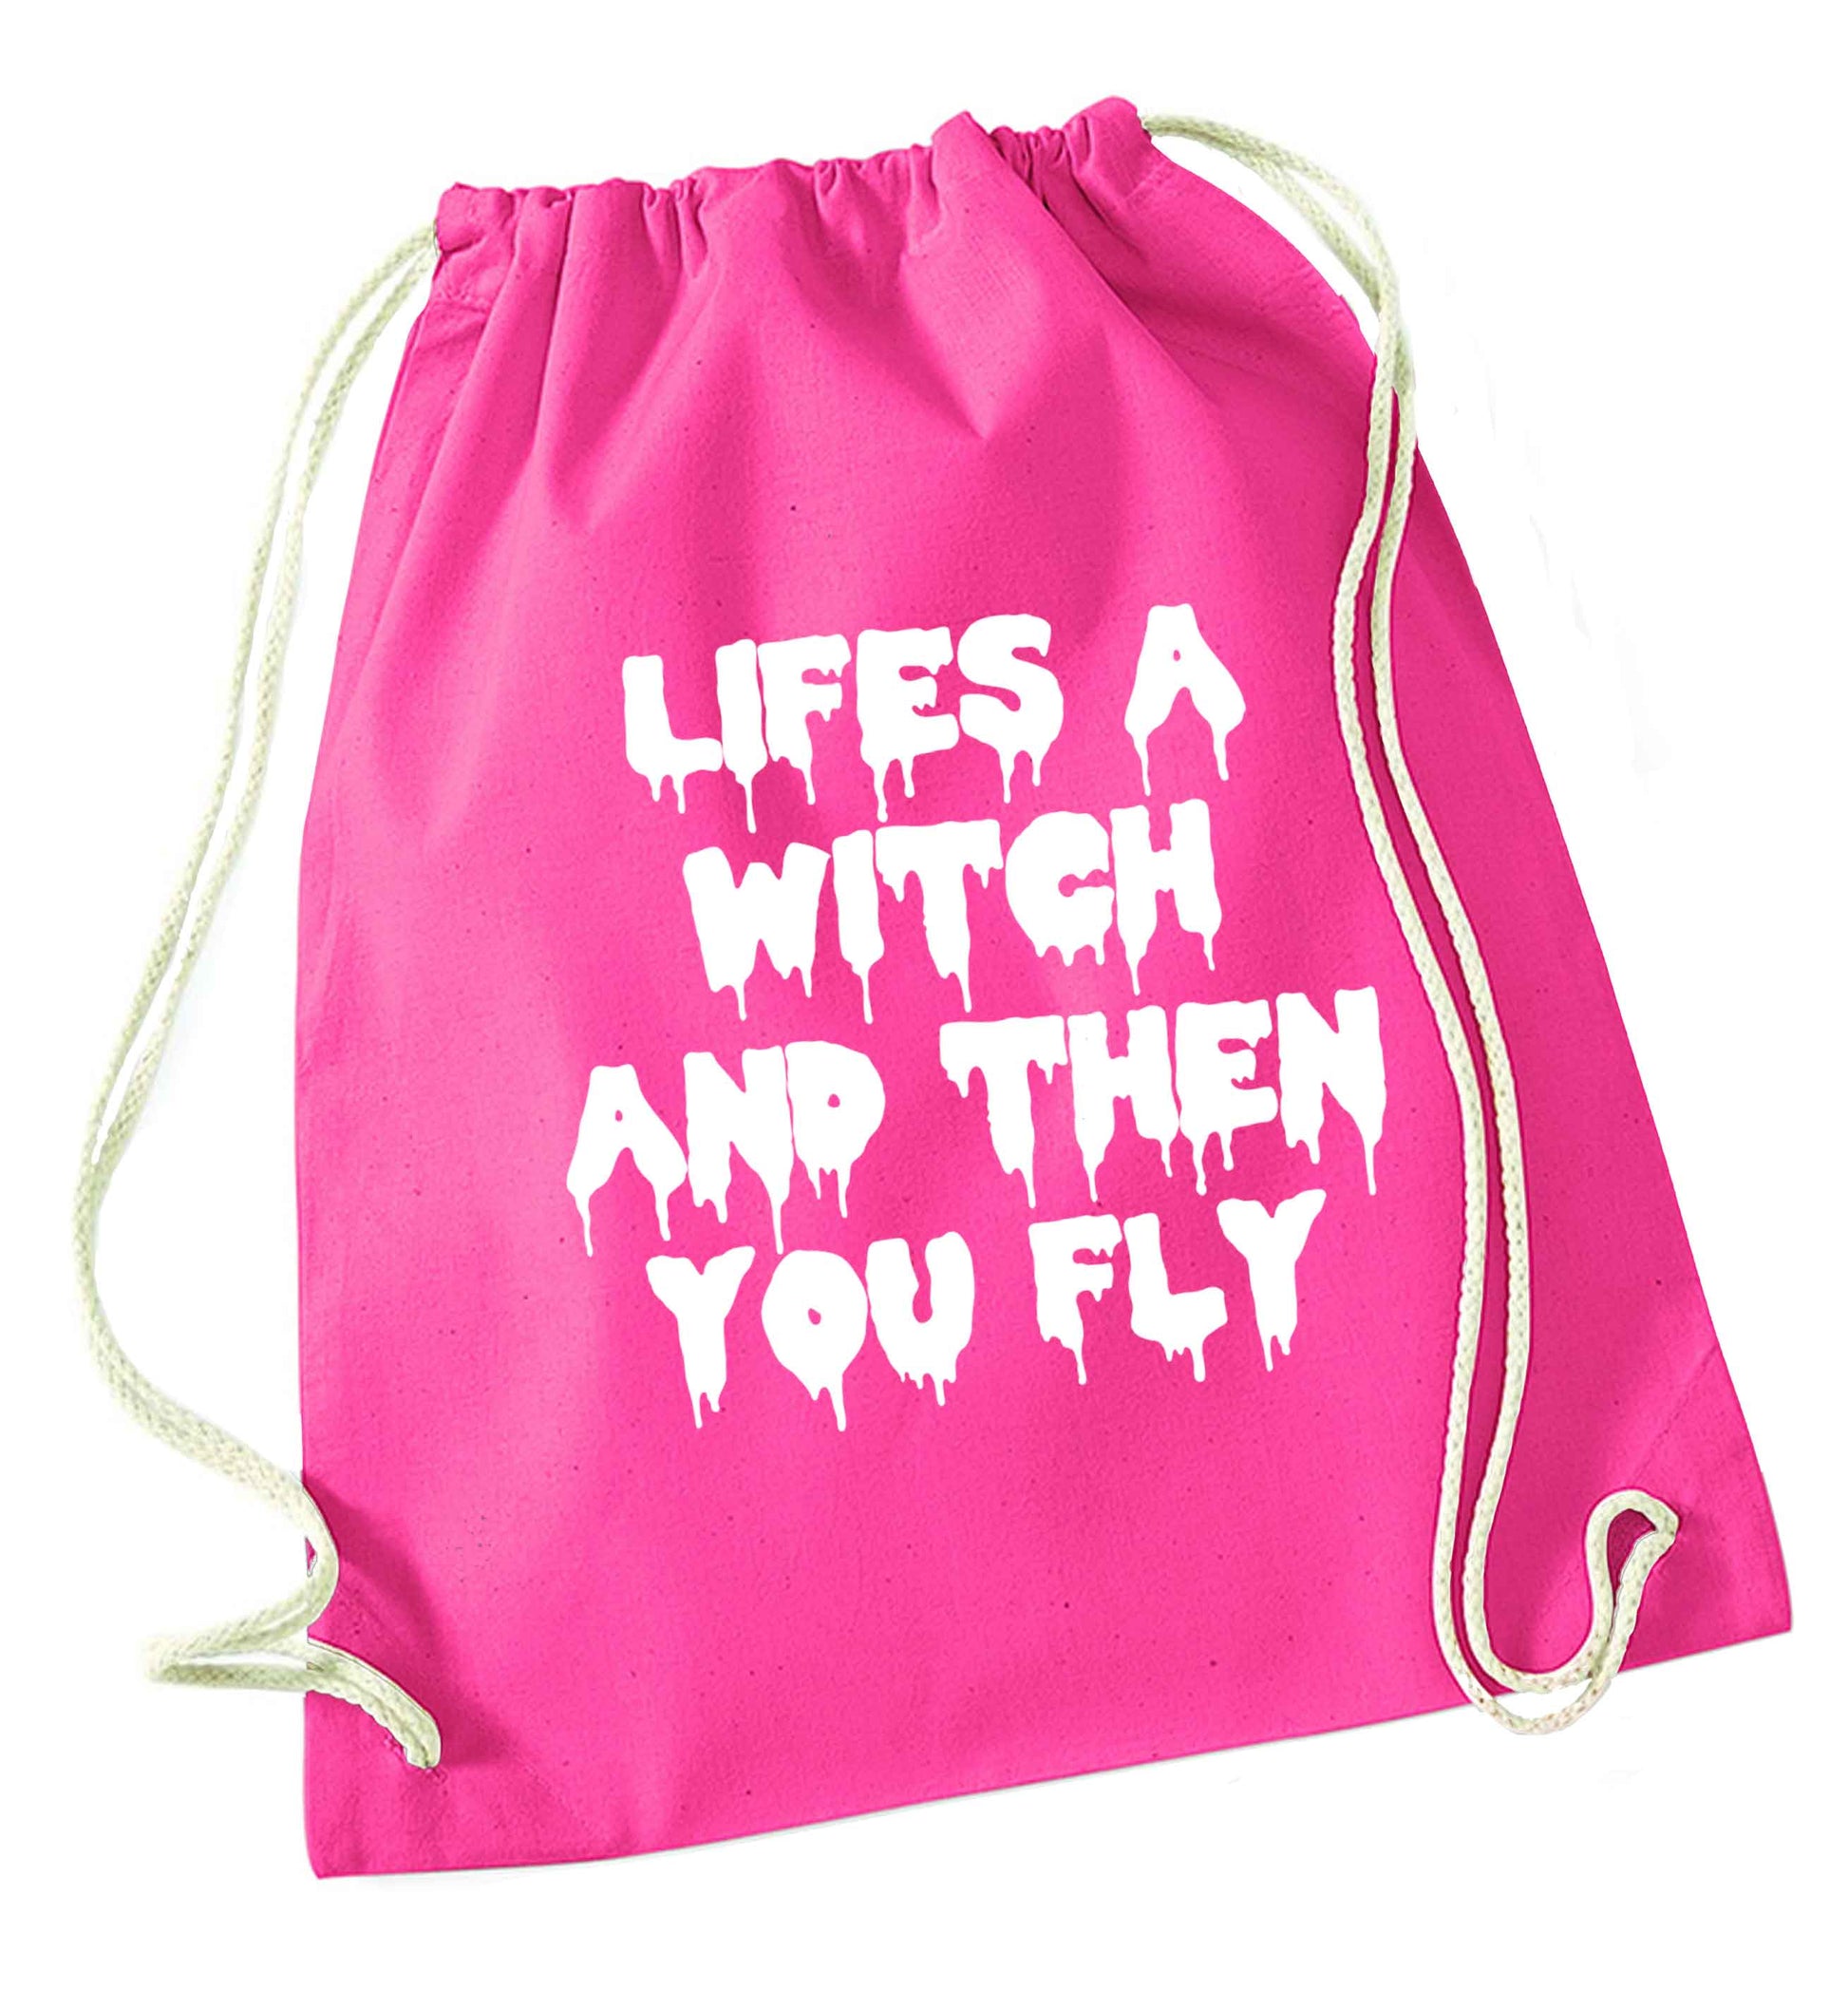 Life's a witch and then you fly pink drawstring bag